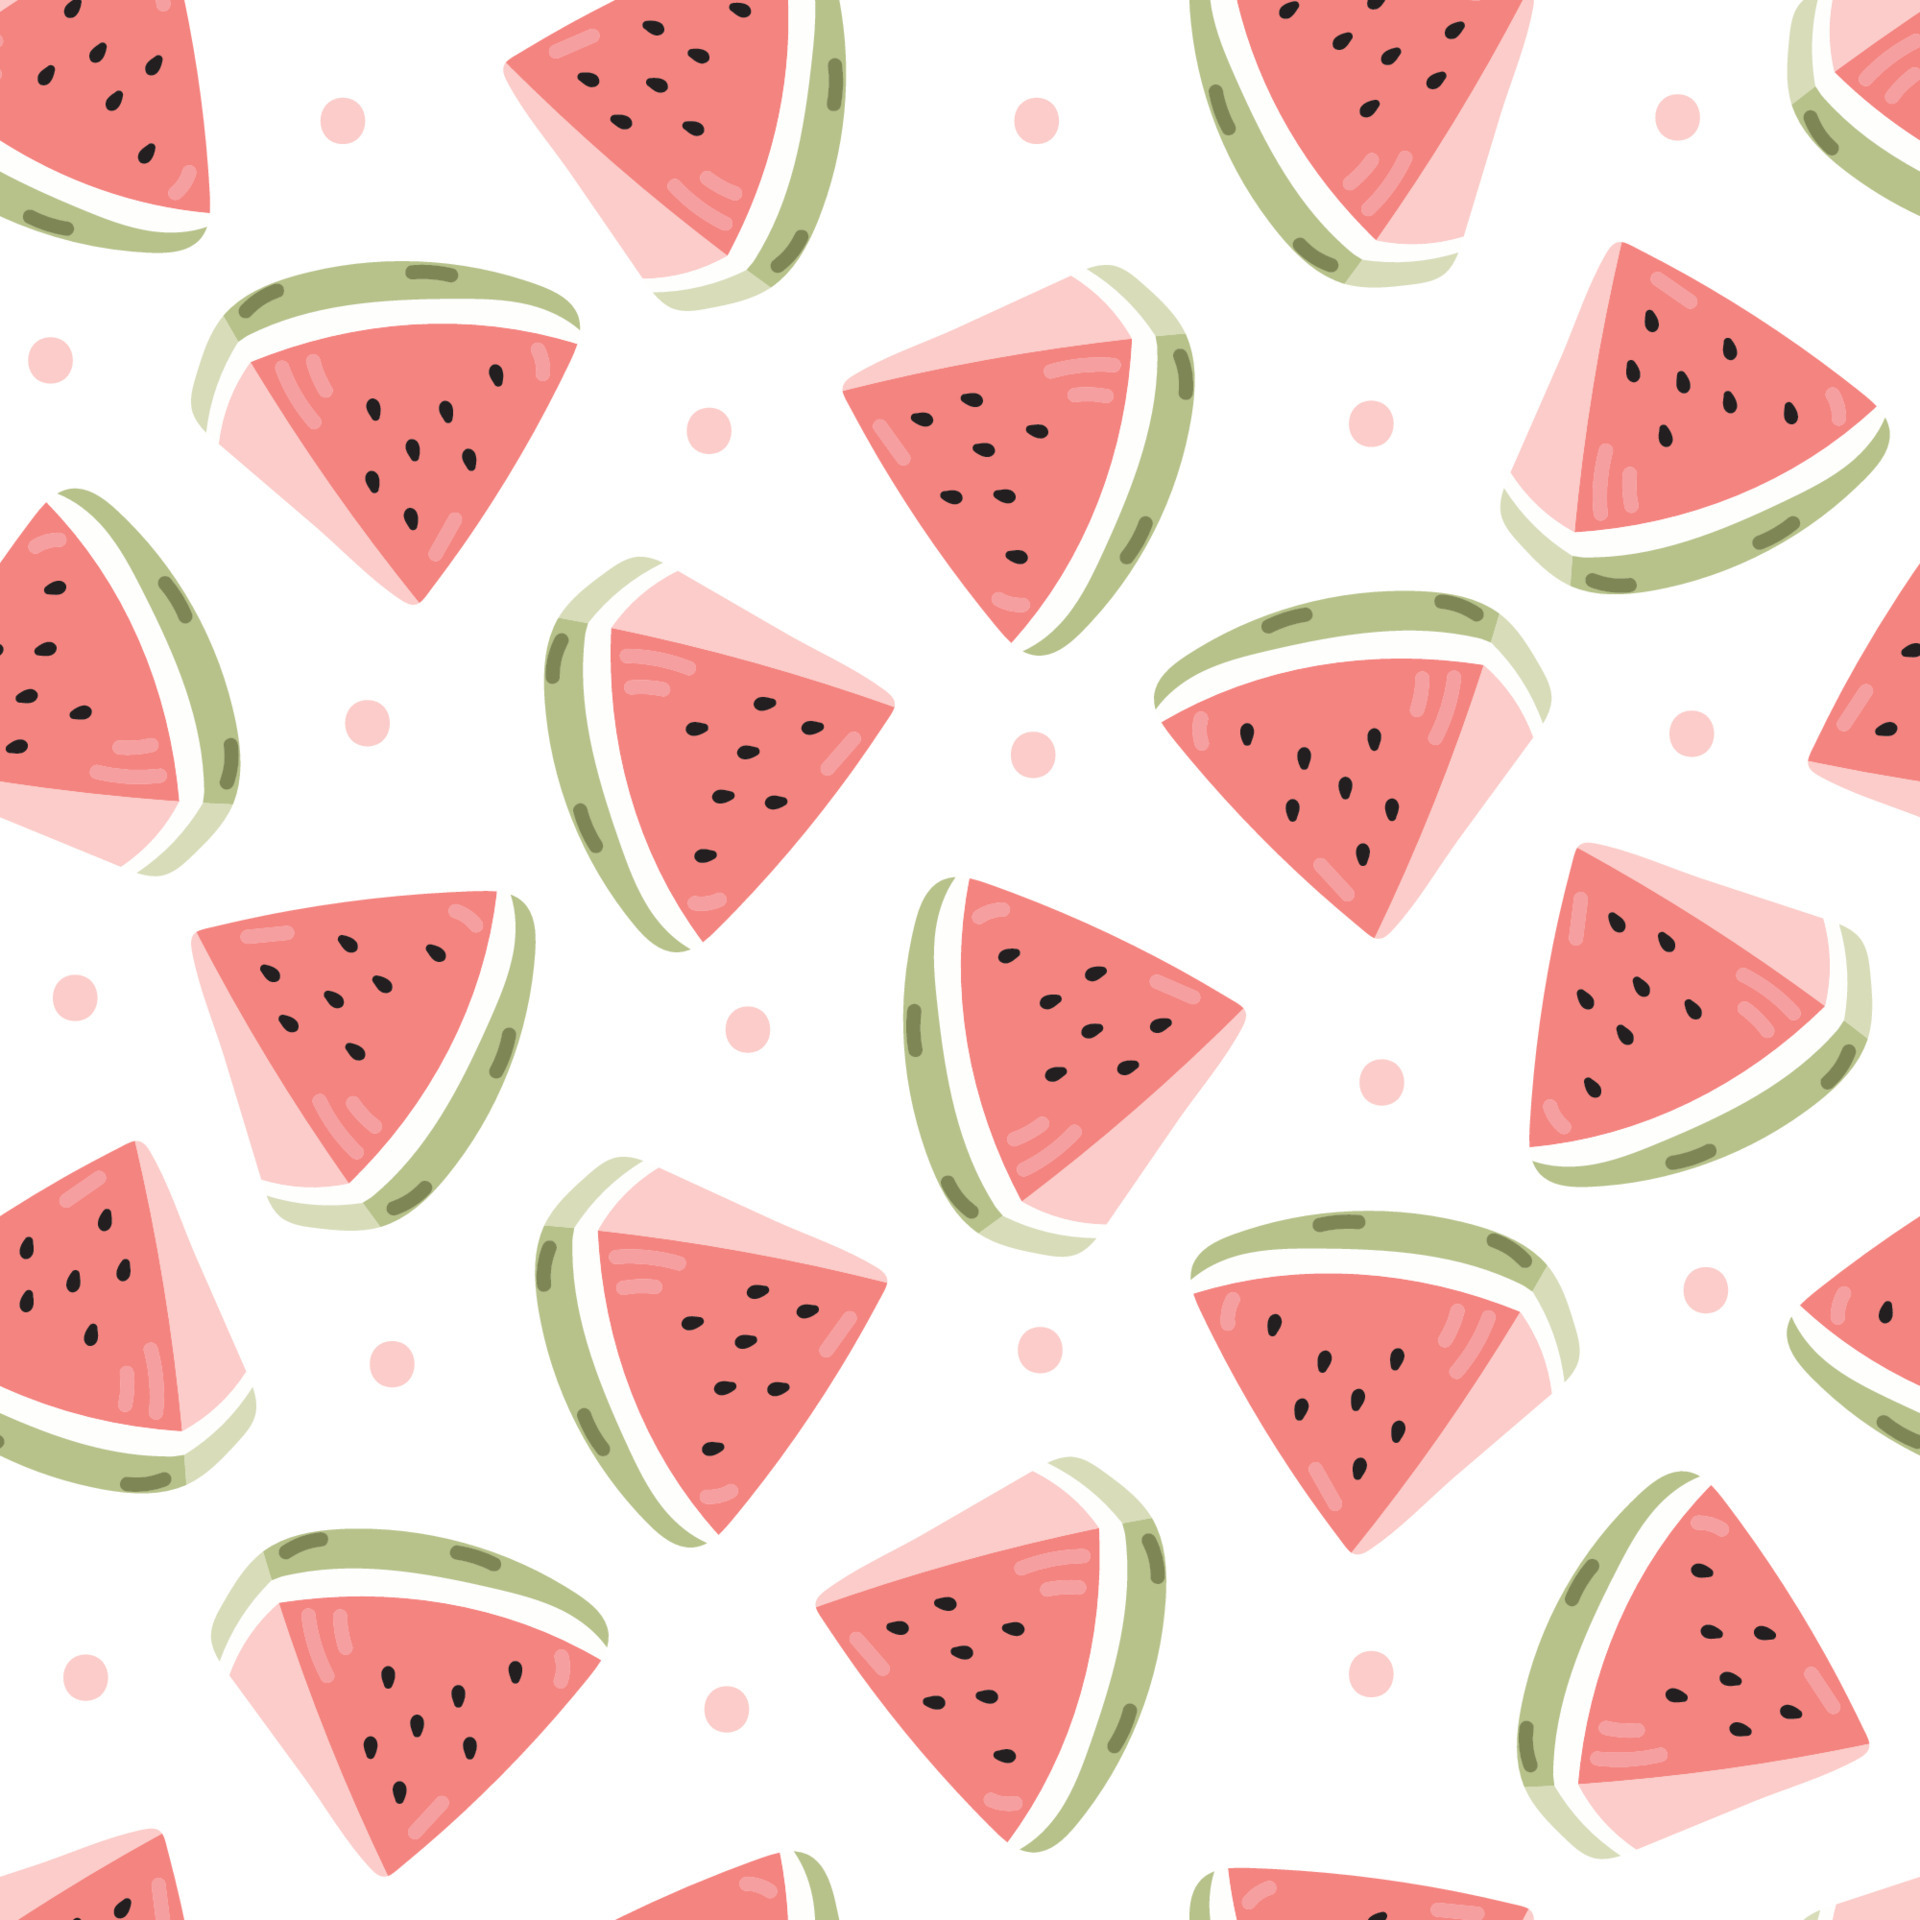 Free Watermelon Wallpaper Background - YES! we made this